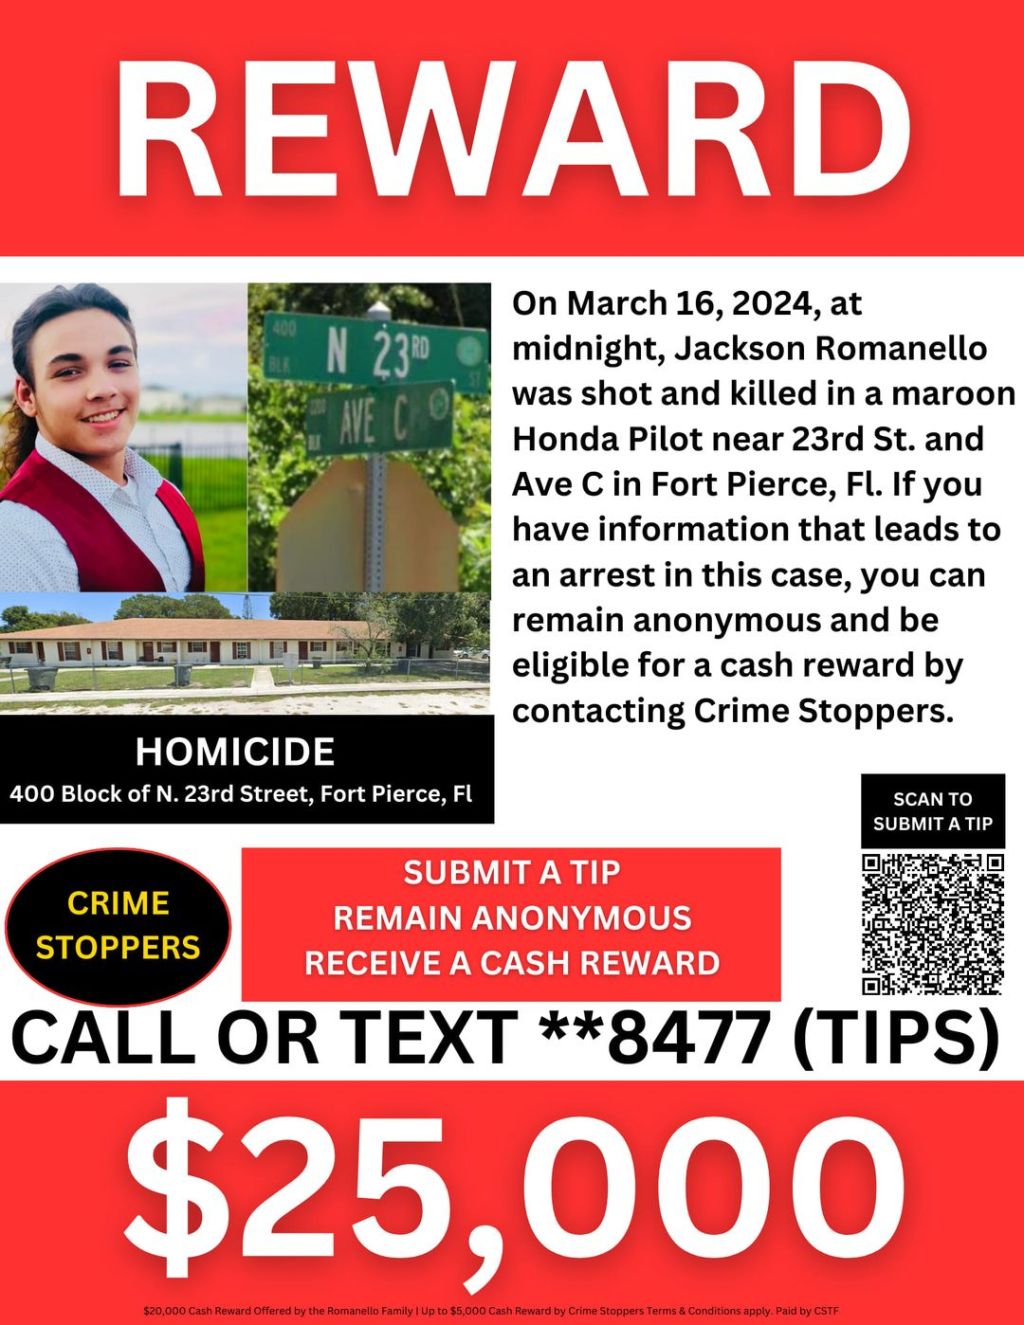 Help find the person who murdered Jackson Romanello